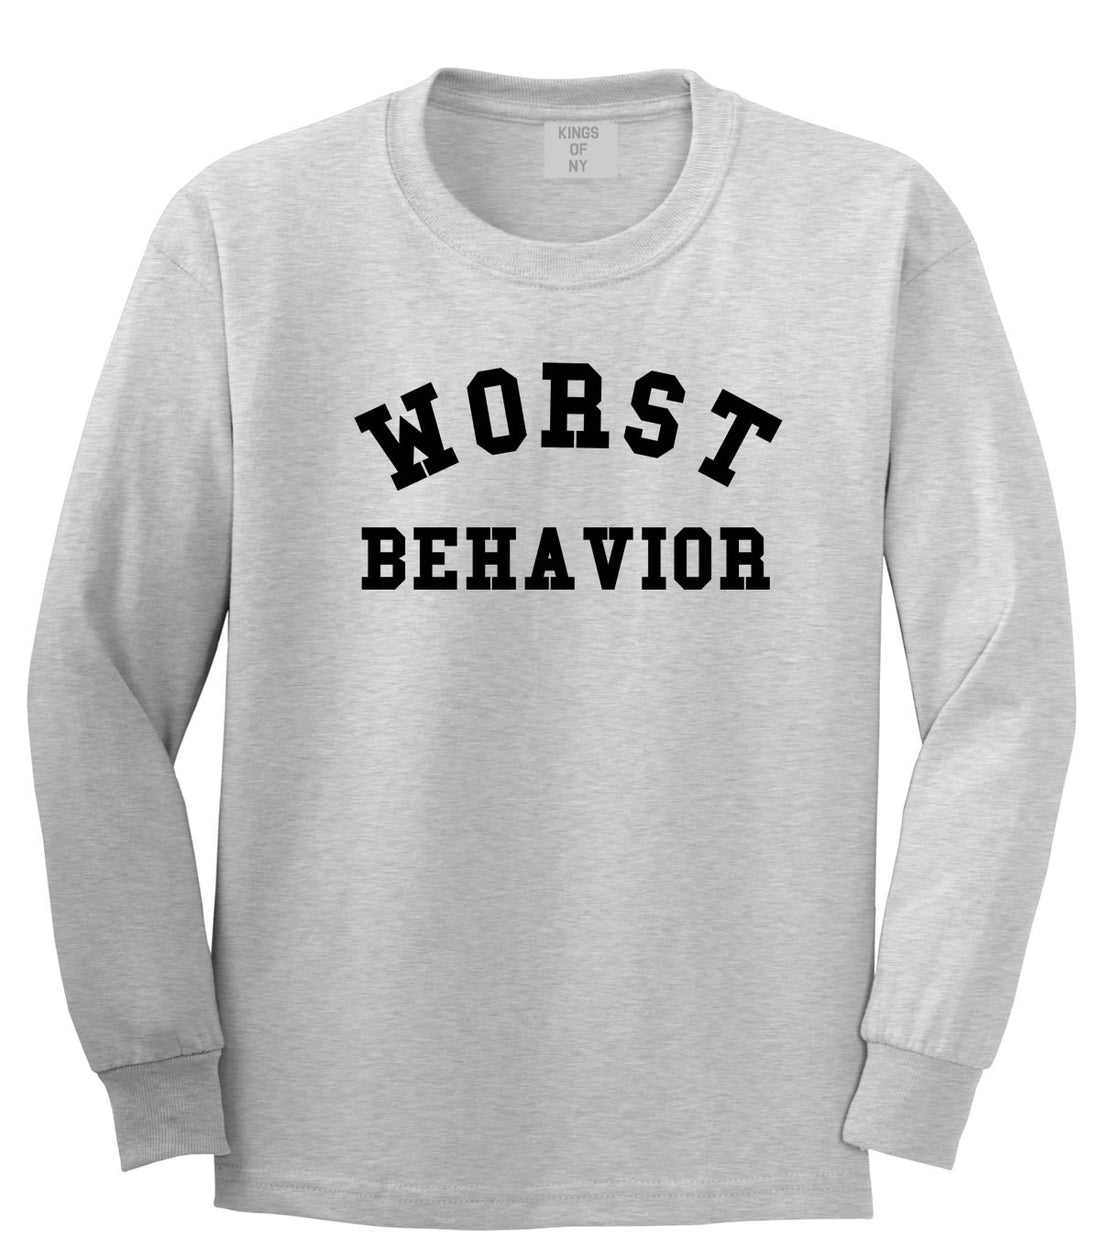 Worst Behavior Long Sleeve T-Shirt in Grey by Kings Of NY